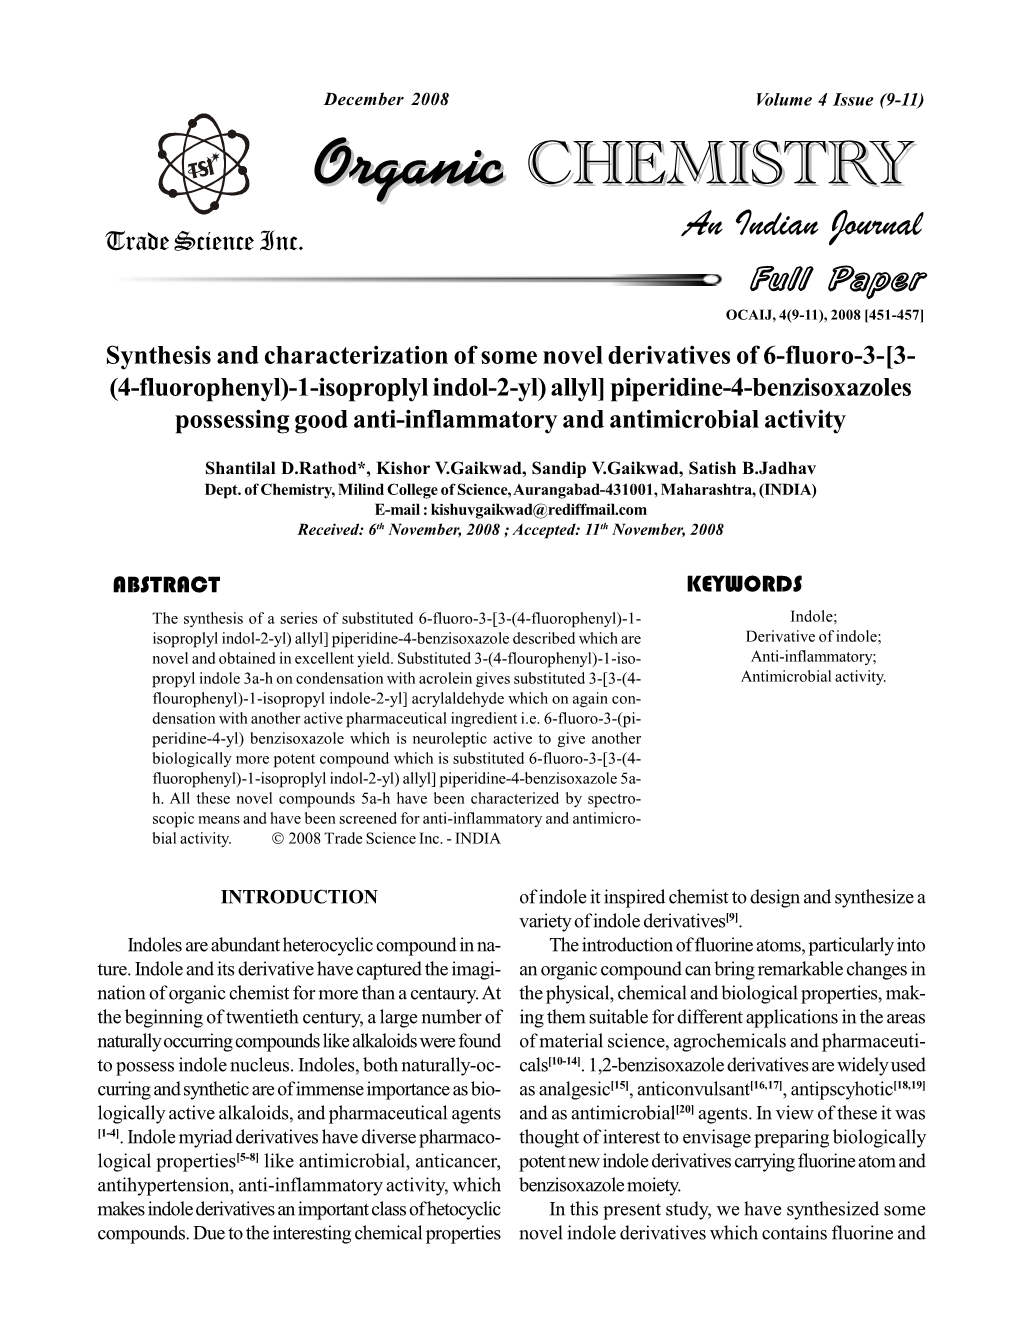 Synthesis and Characterization of Some Novel Derivatives of 6-Fluoro-3